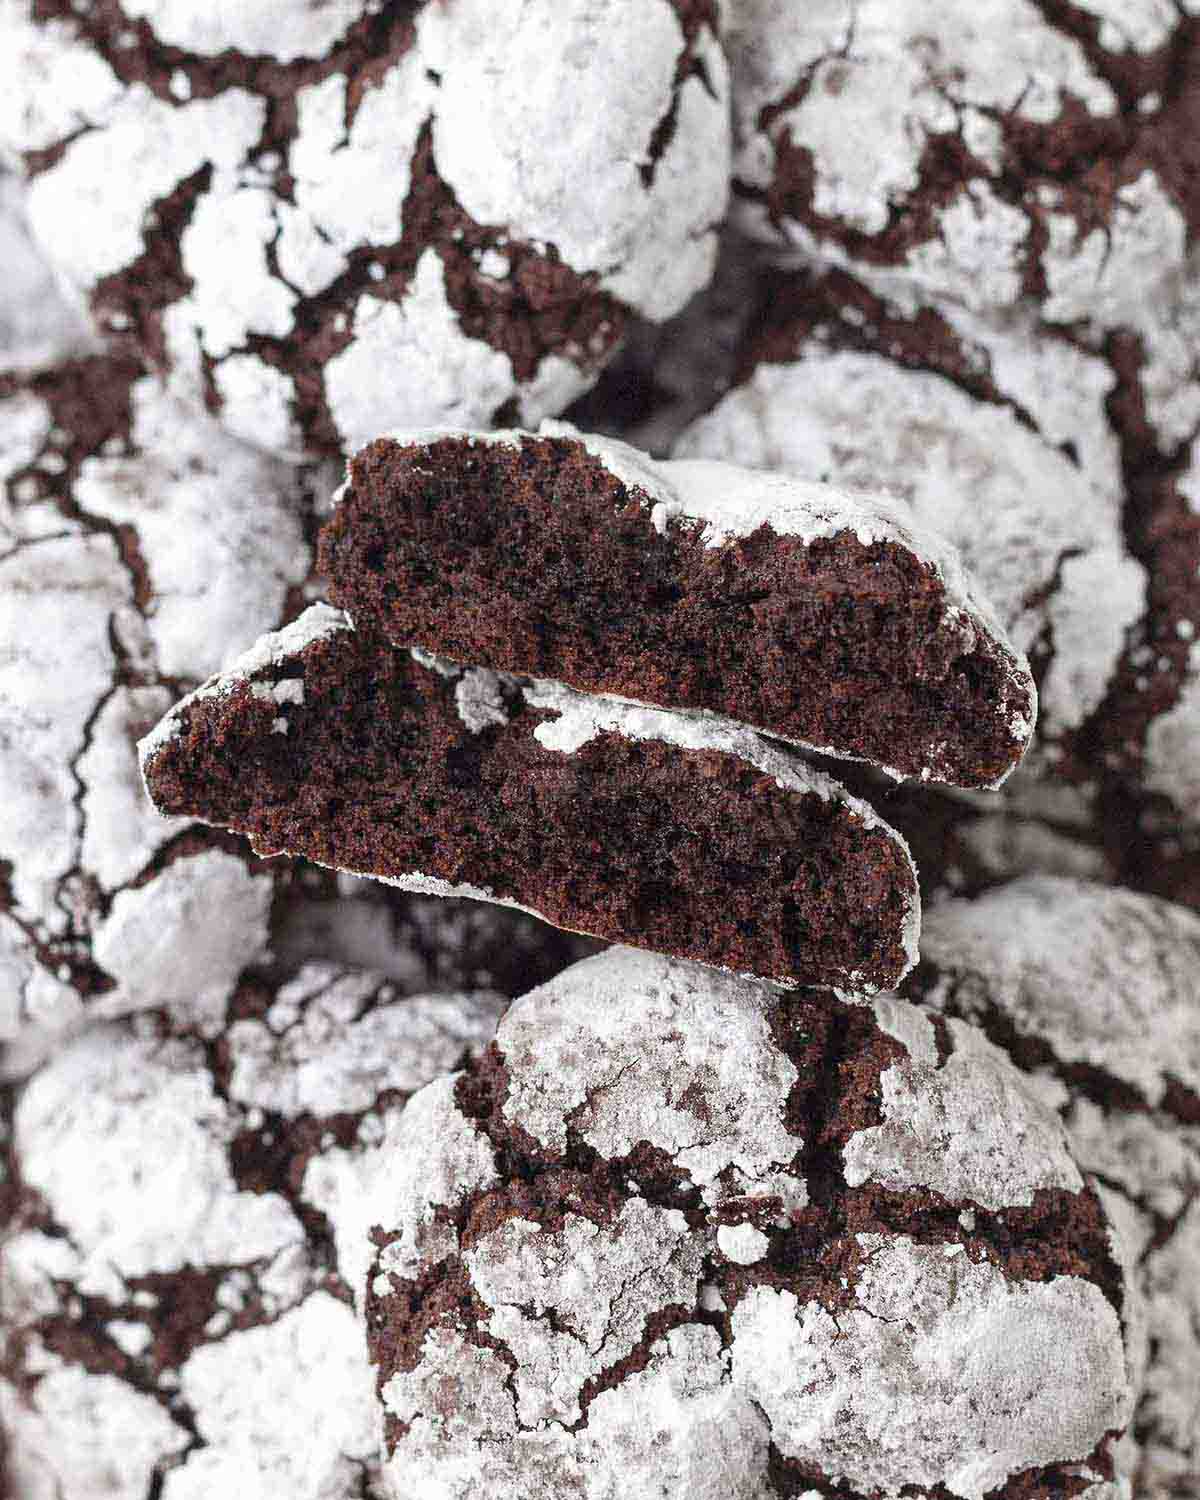 A vegan chocolate crinkle cookie split in two to show the fudgy center.